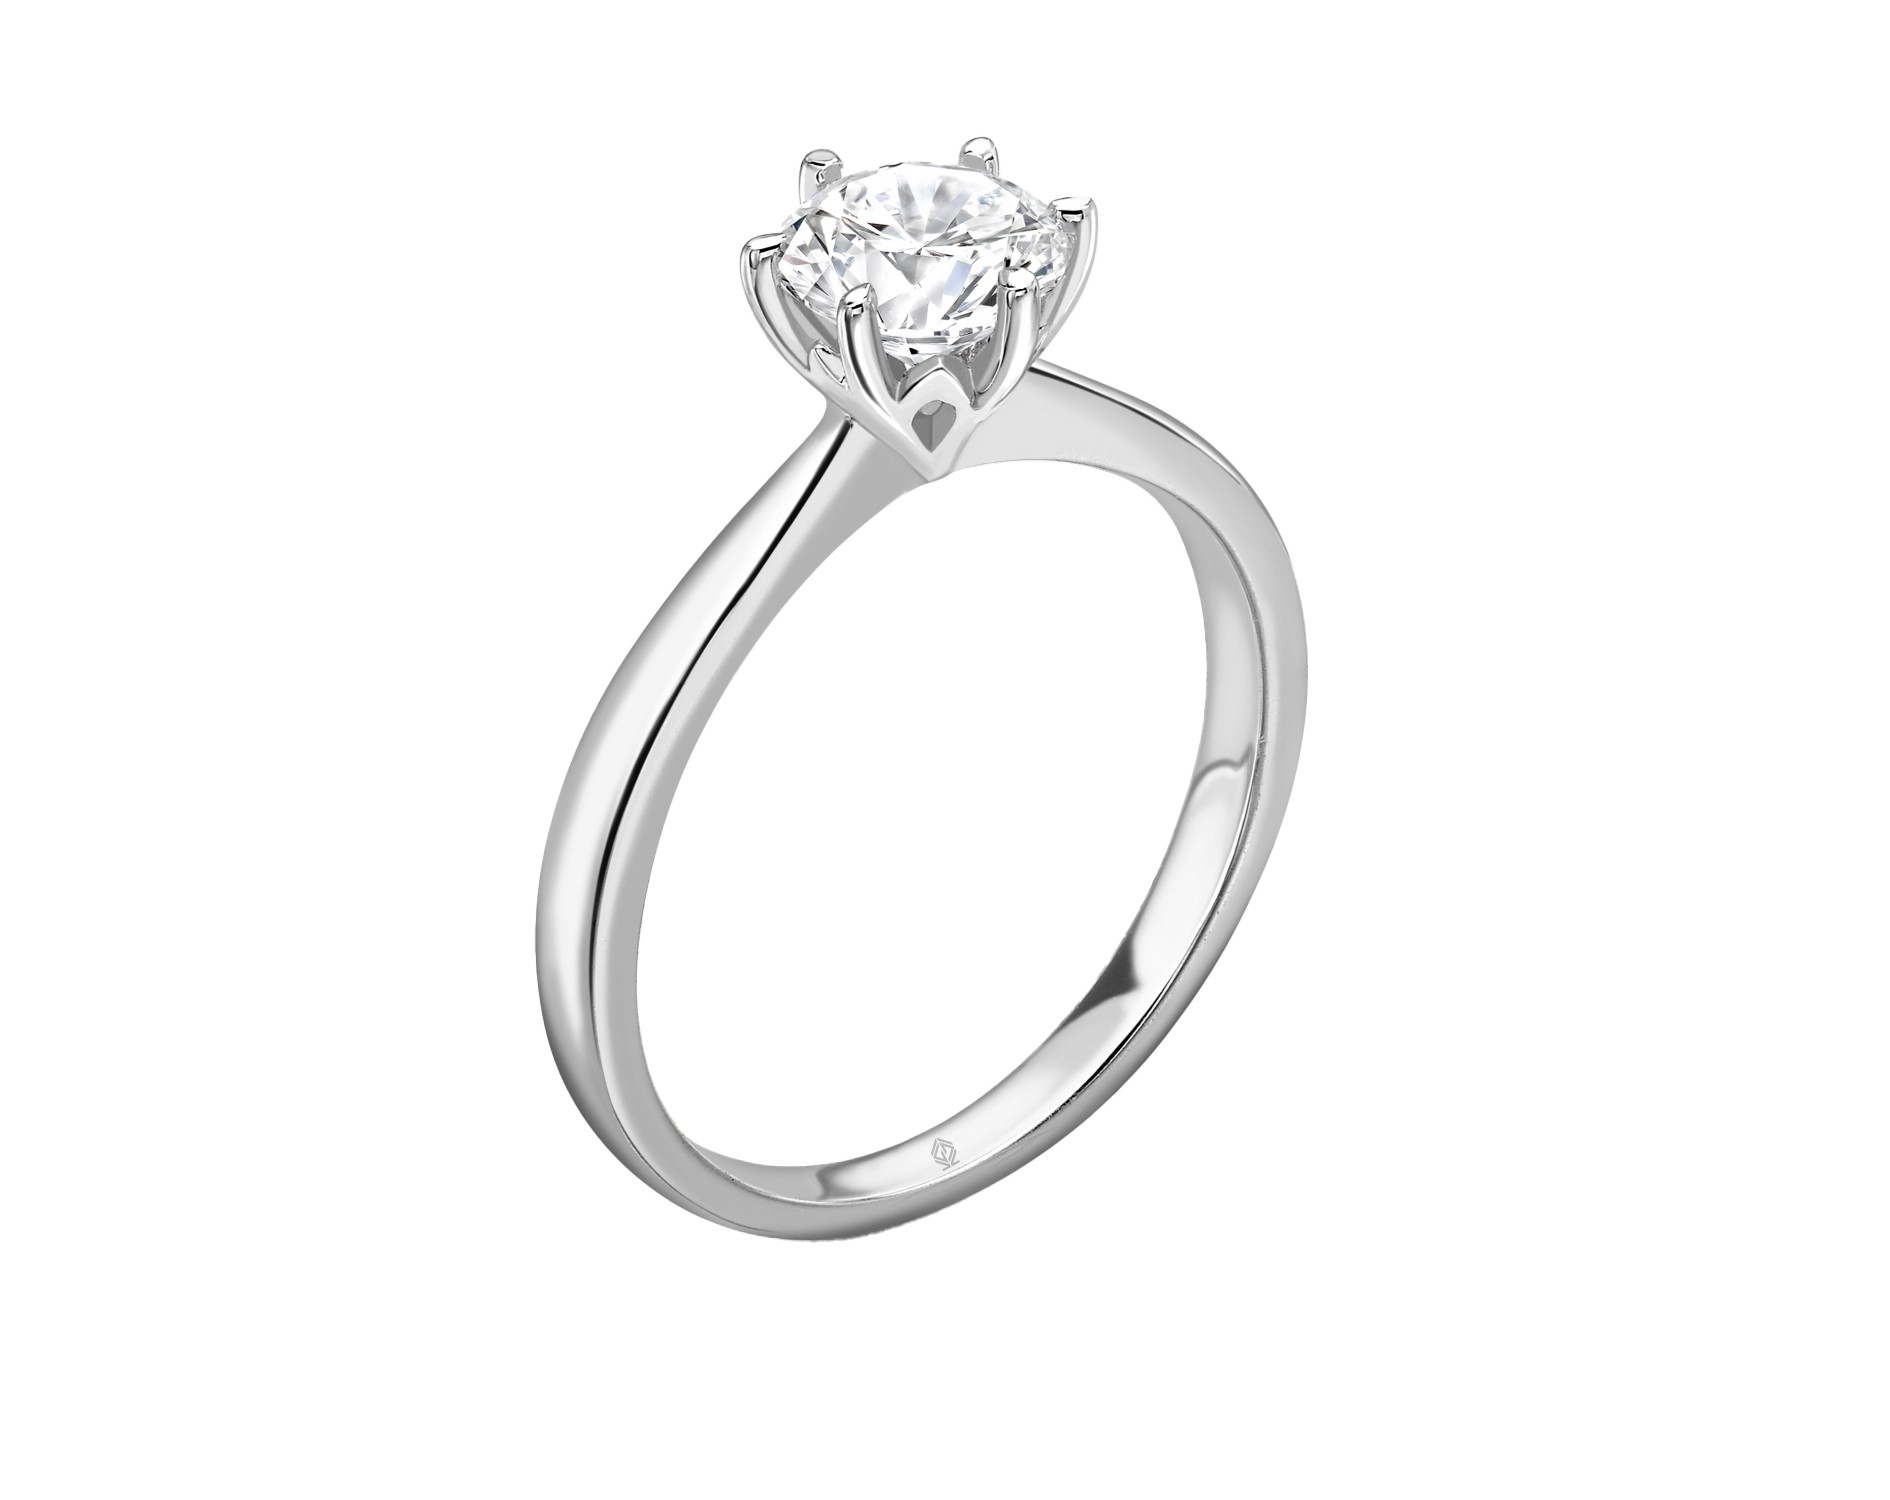 18K WHITE GOLD 6 PRONGS HEAD SOLITAIRE ROUND CUT DIAMOND ENGAGEMENT RING